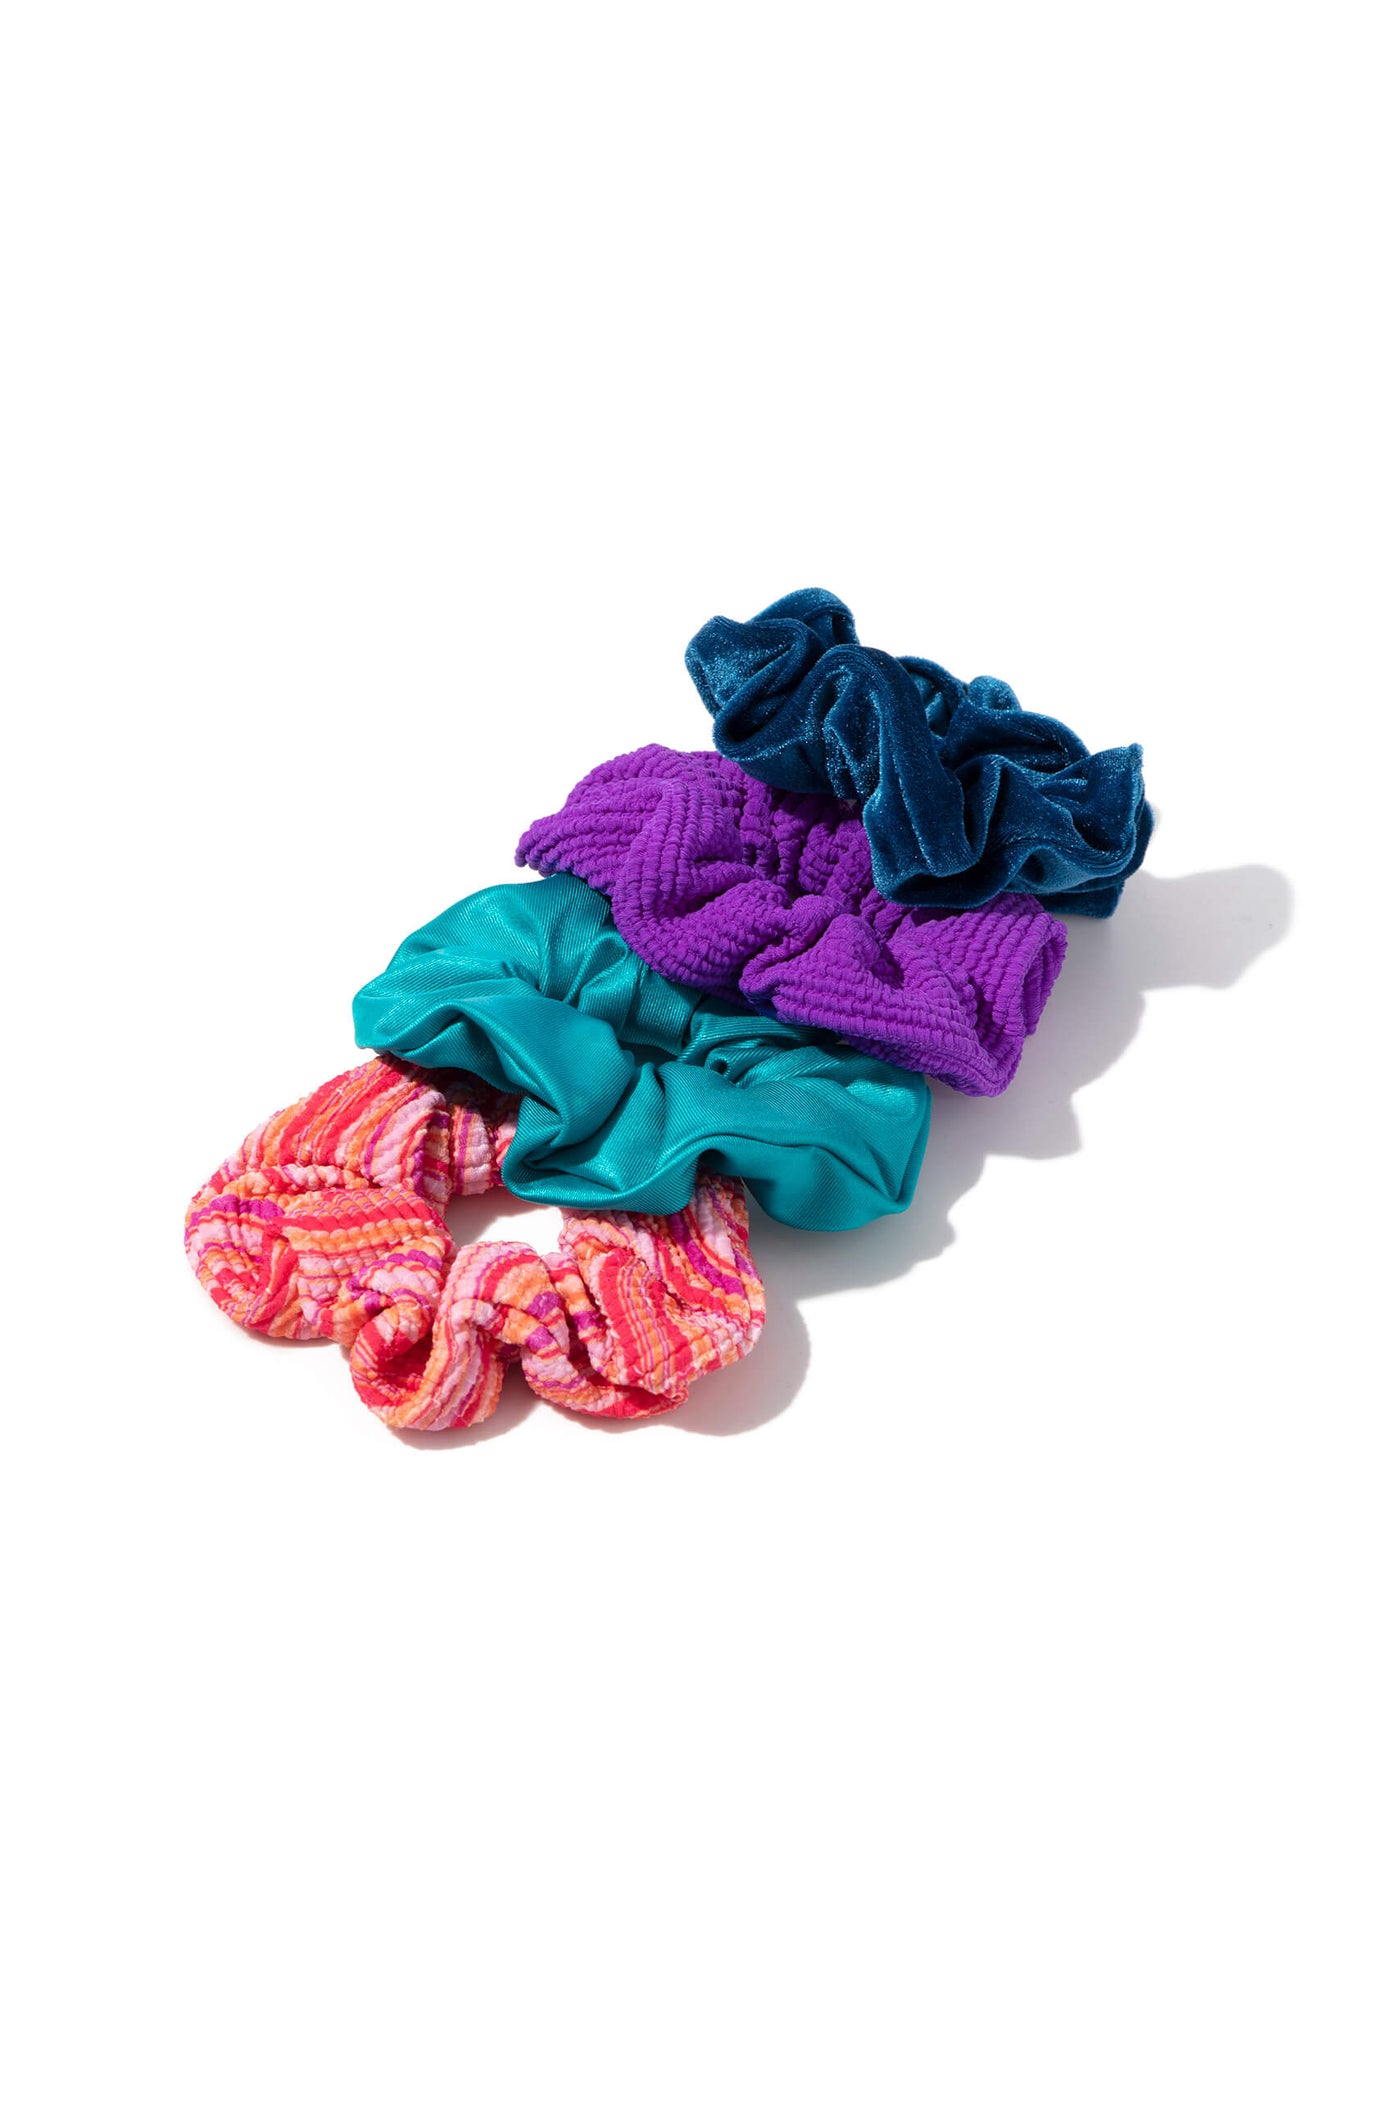 Four Scrunchies in different colors on white background.